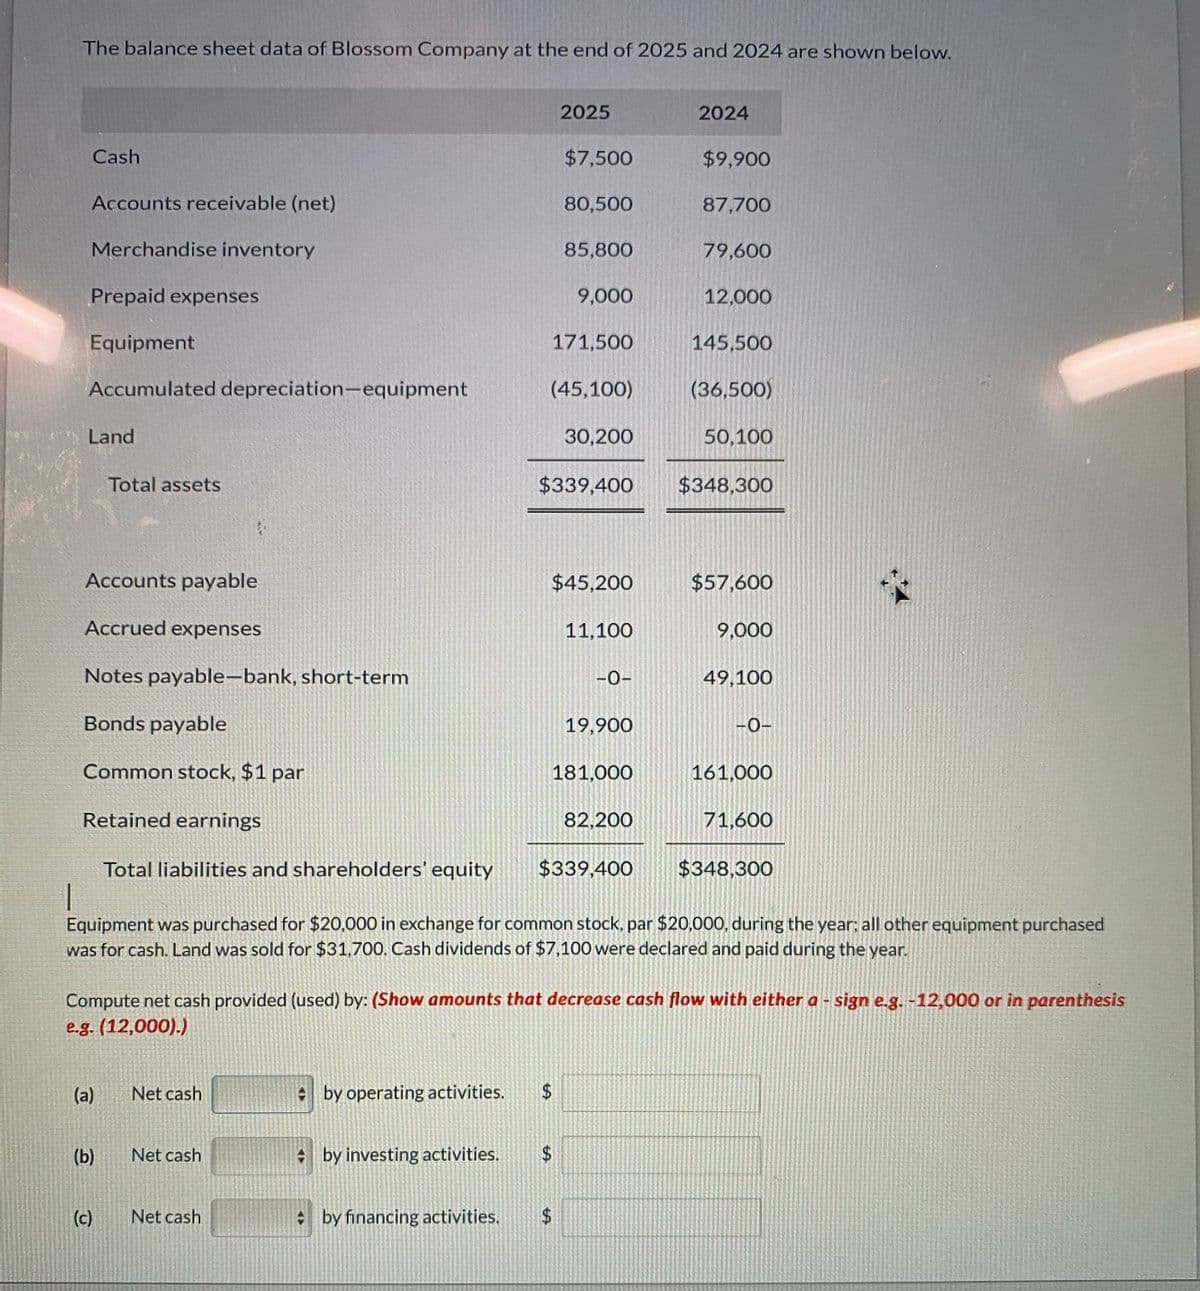 The balance sheet data of Blossom Company at the end of 2025 and 2024 are shown below.
2025
2024
Cash
$7,500
$9,900
Accounts receivable (net)
80,500
87,700
Merchandise inventory
85,800
79,600
Prepaid expenses
9,000
12,000
Equipment
171,500
145,500
Accumulated depreciation-equipment
(45,100)
(36,500)
Land
30,200
50,100
Total assets
$339,400 $348,300
Accounts payable
$45,200
$57,600
Accrued expenses
11,100
9,000
Notes payable-bank, short-term
-0-
49,100
Bonds payable
19,900
-0-
Common stock, $1 par
181,000
161,000
Retained earnings
82,200
71,600
Total liabilities and shareholders' equity
$339,400
$348,300
Equipment was purchased for $20,000 in exchange for common stock, par $20,000, during the year; all other equipment purchased
was for cash. Land was sold for $31,700. Cash dividends of $7,100 were declared and paid during the year.
Compute net cash provided (used) by: (Show amounts that decrease cash flow with either a - sign e.g. -12,000 or in parenthesis
e.g. (12,000).)
(a)
Net cash
by operating activities. $
(b)
Net cash
by investing activities.
$
(c)
Net cash
by financing activities.
$